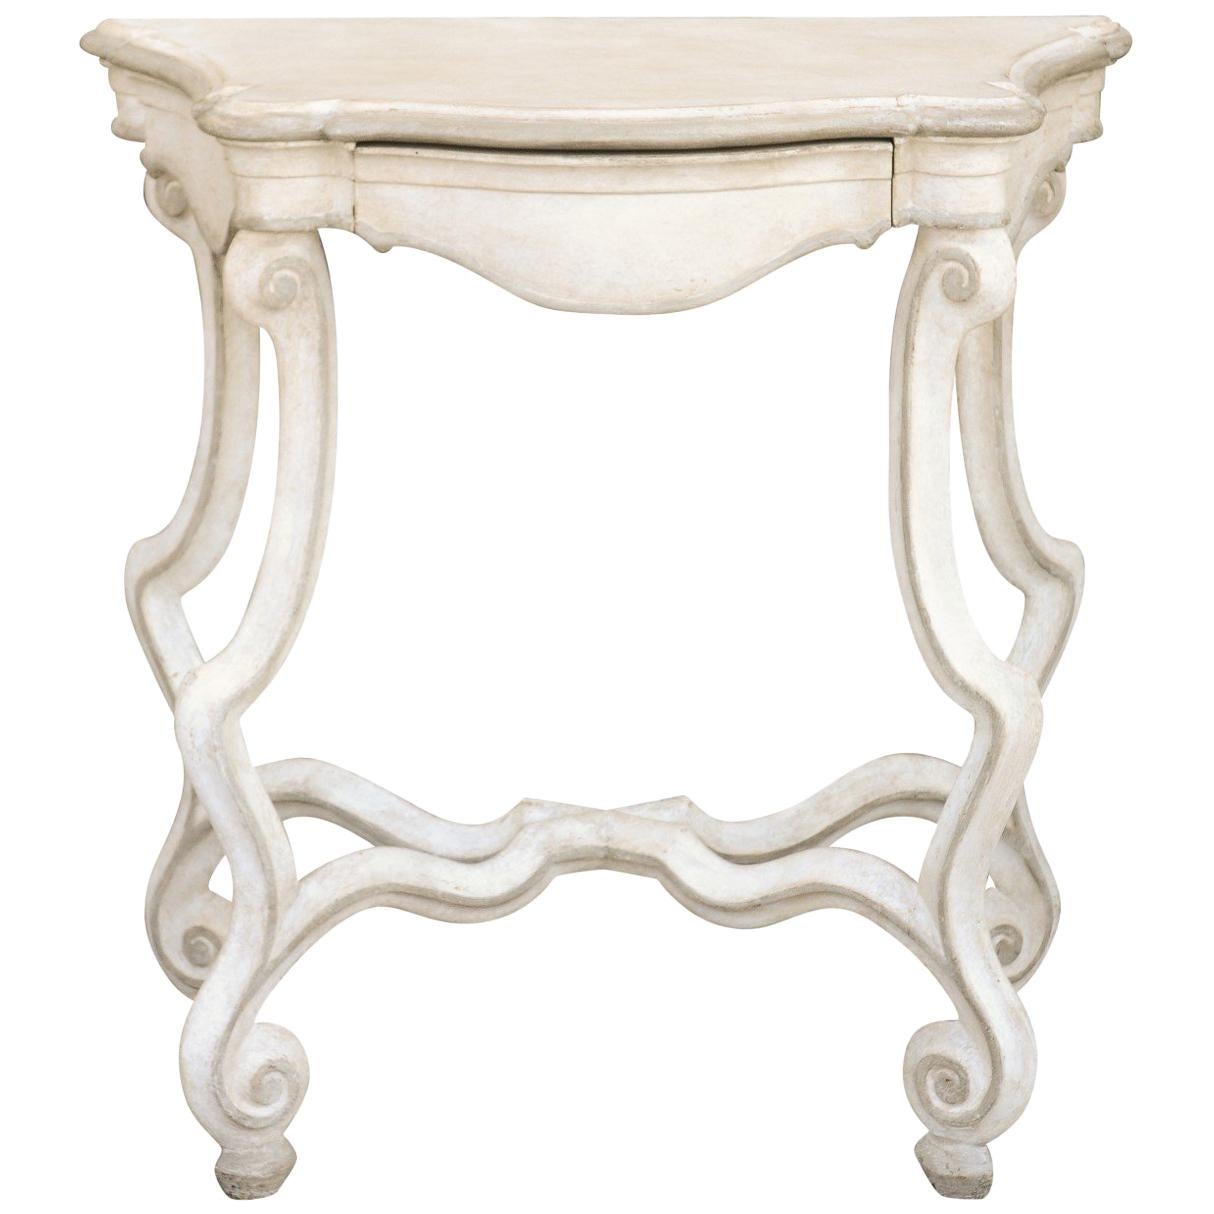 French 1900 Rococo Style Painted Console Table with Scrolling Legs and Stretcher For Sale